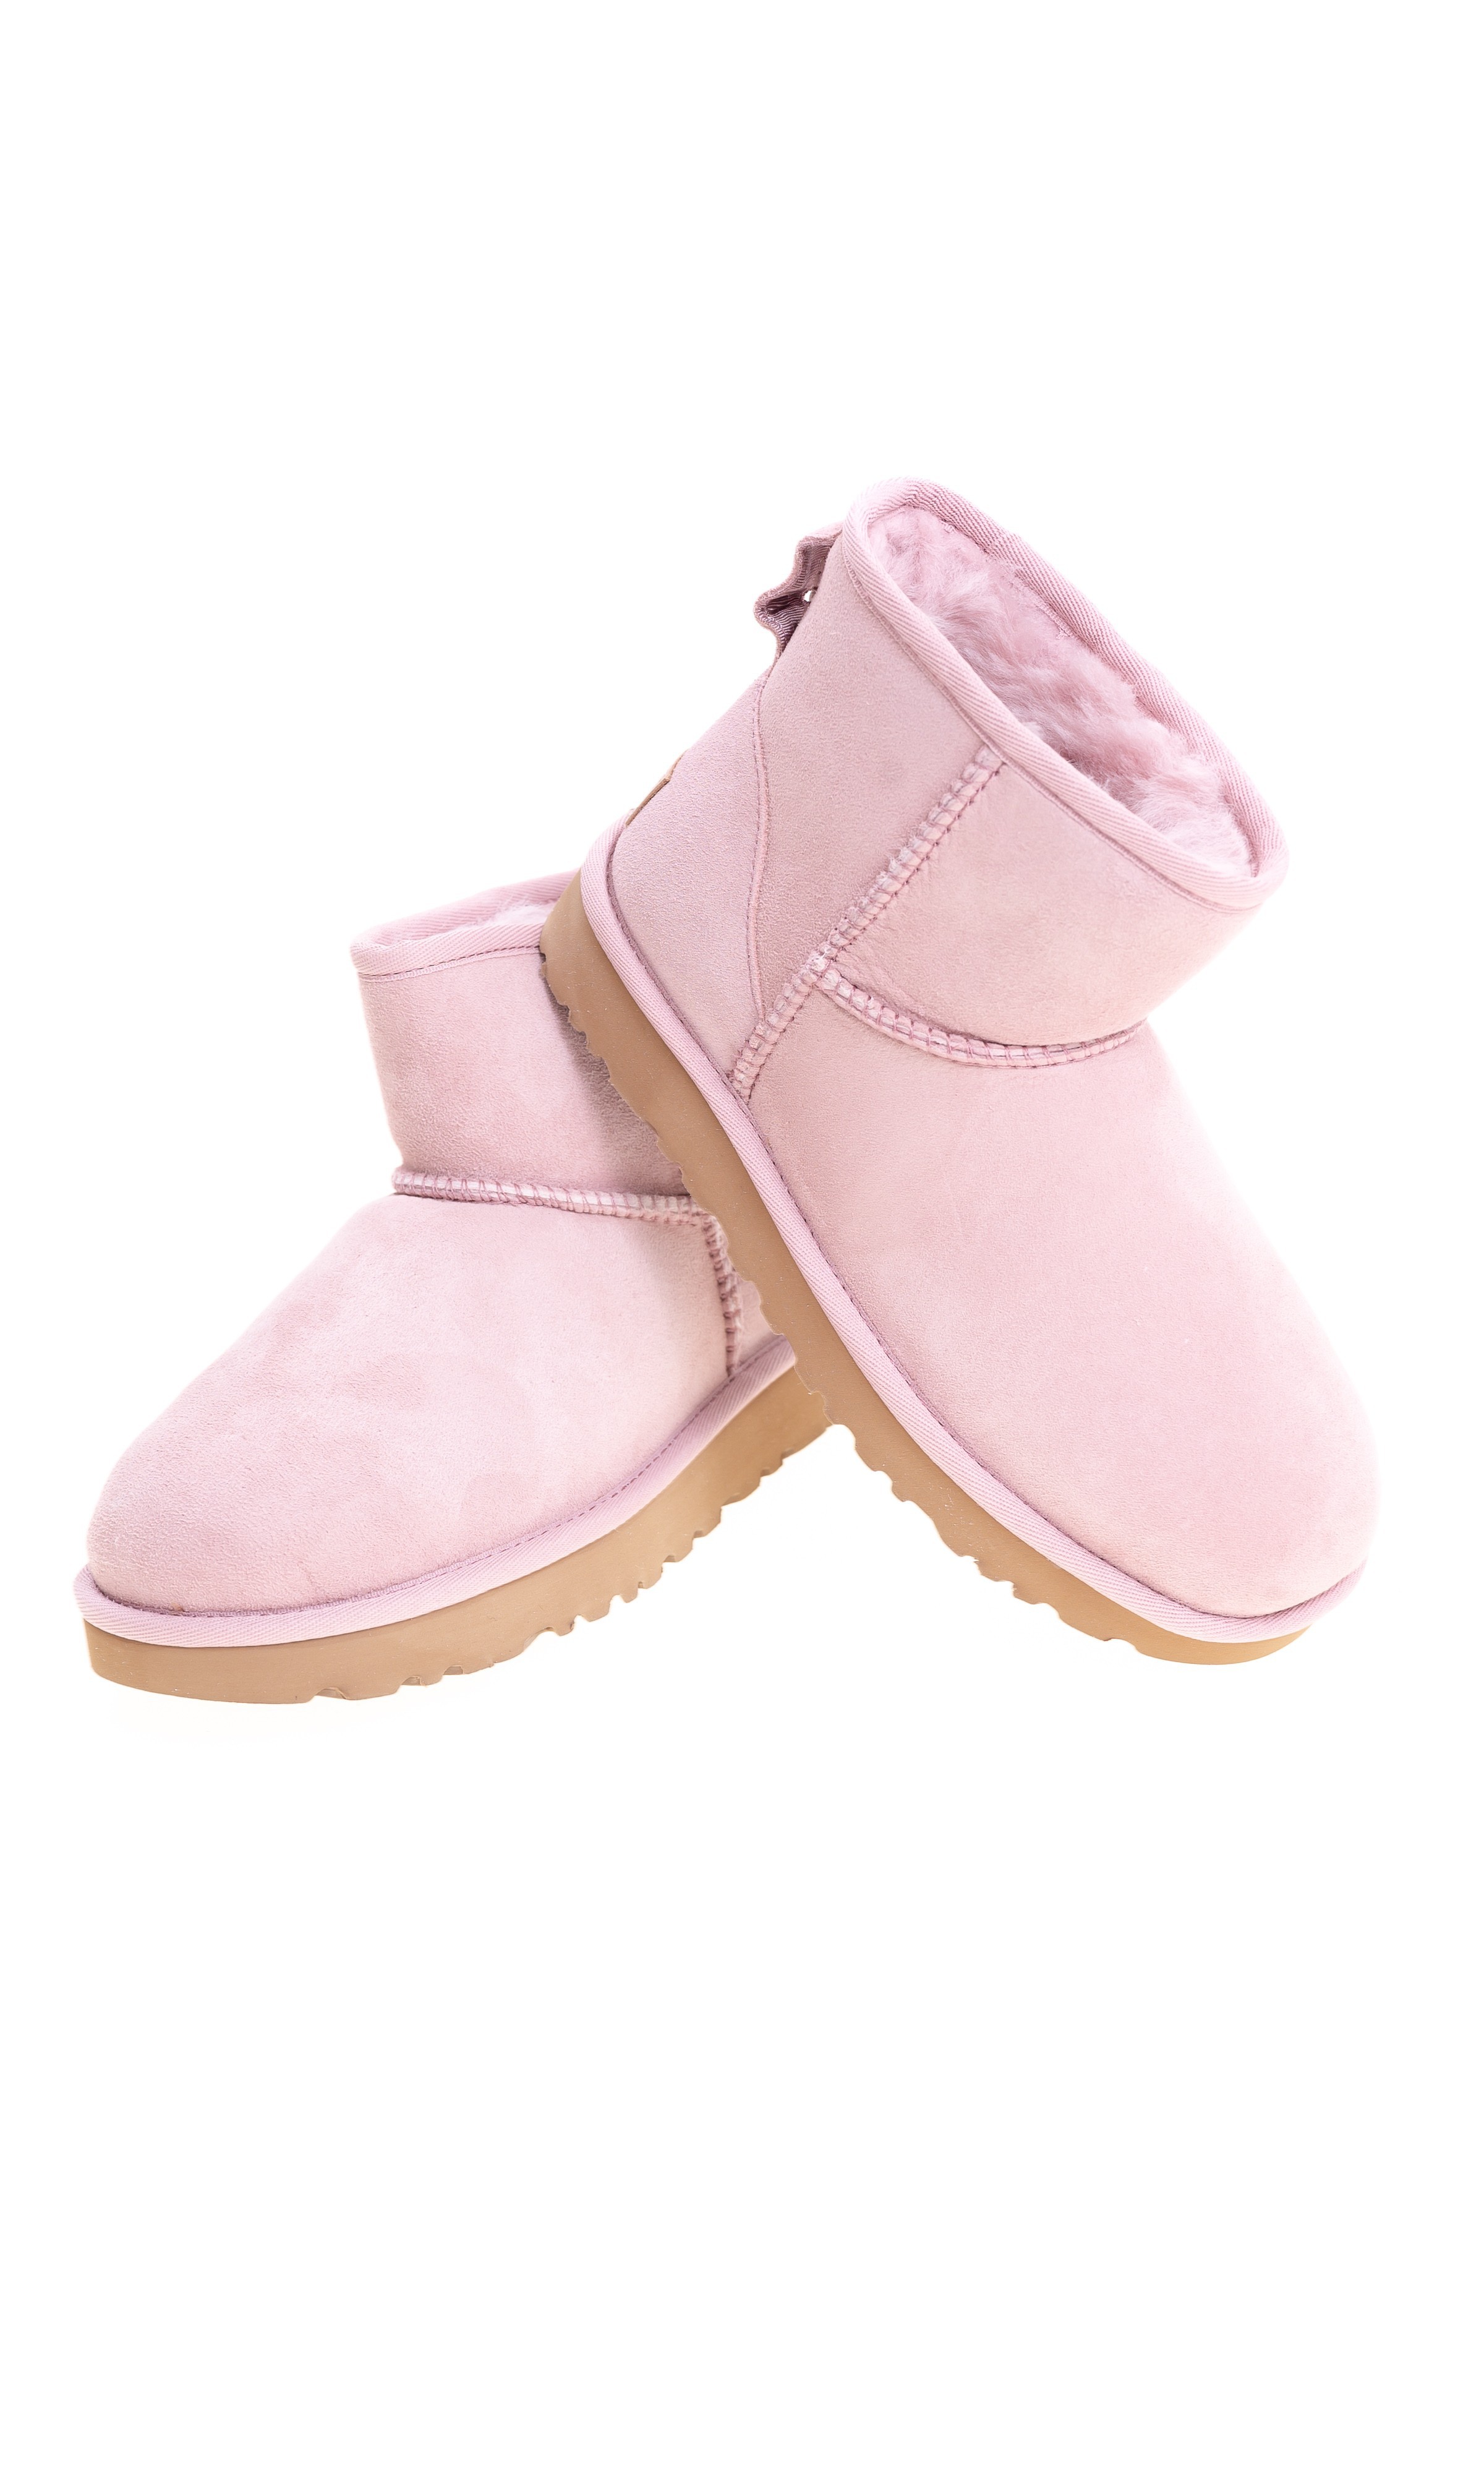 pale pink ugg boots